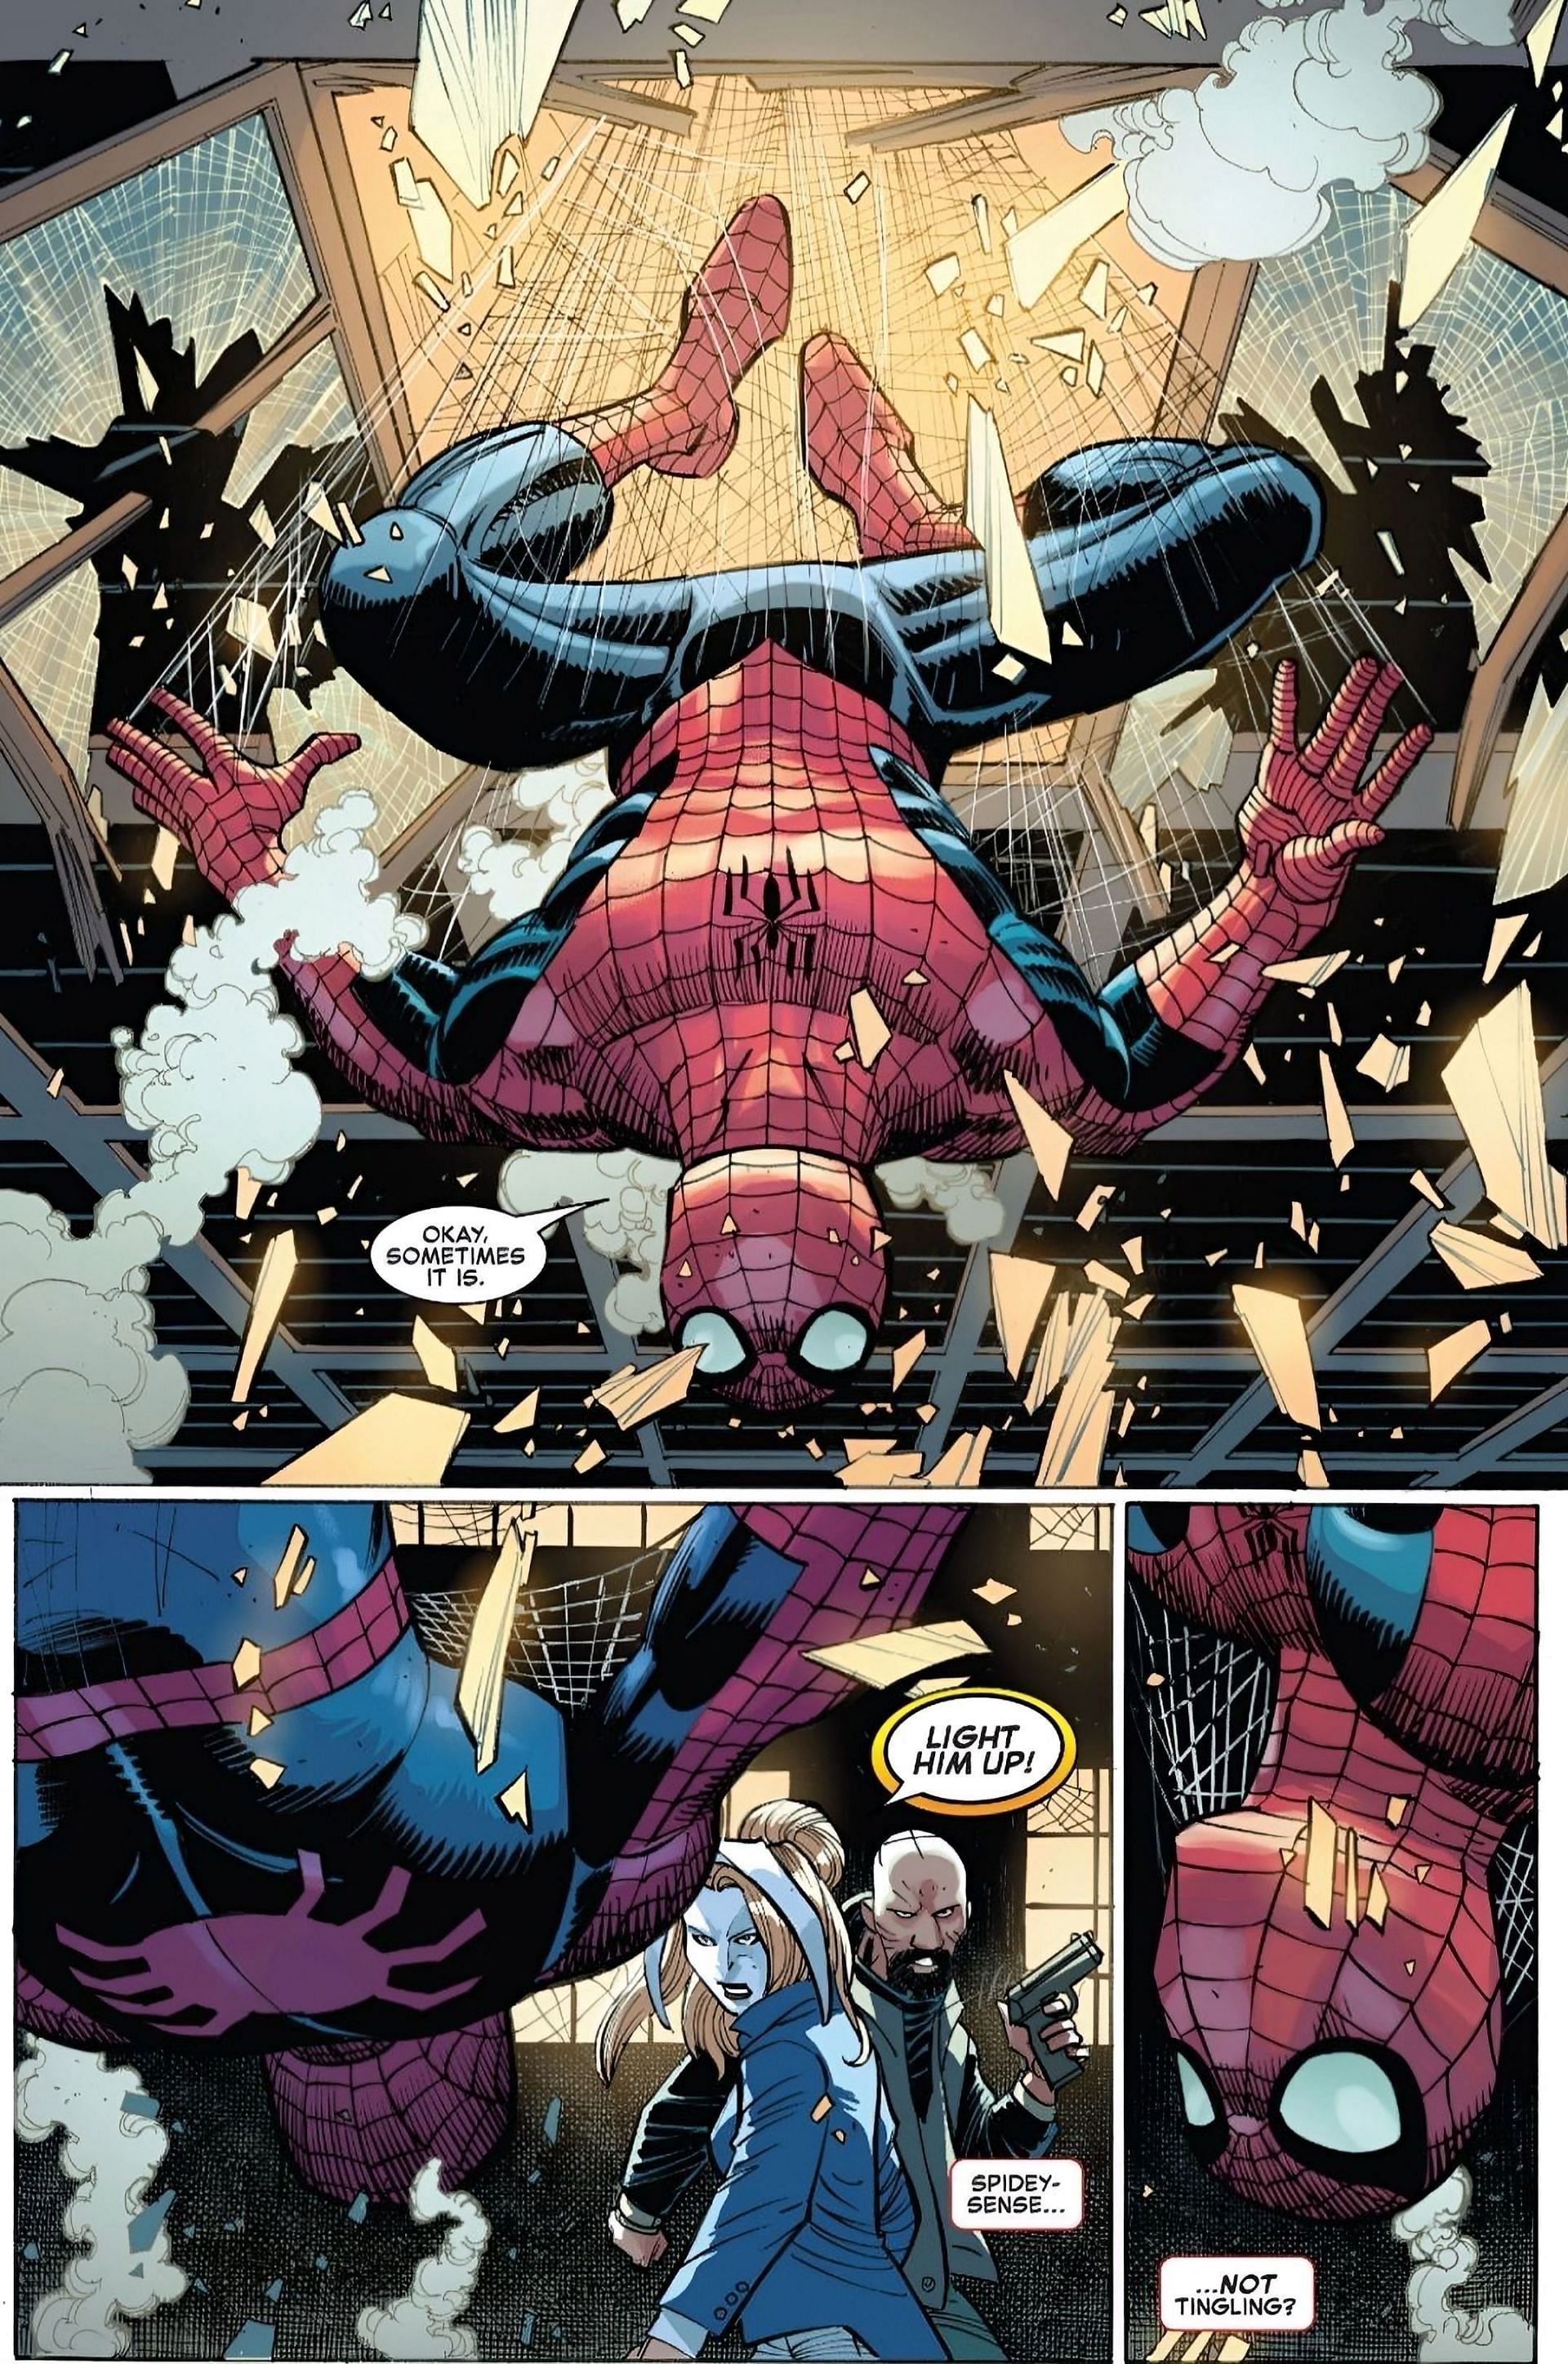 The Amazing Spider-Man #2 Reviews